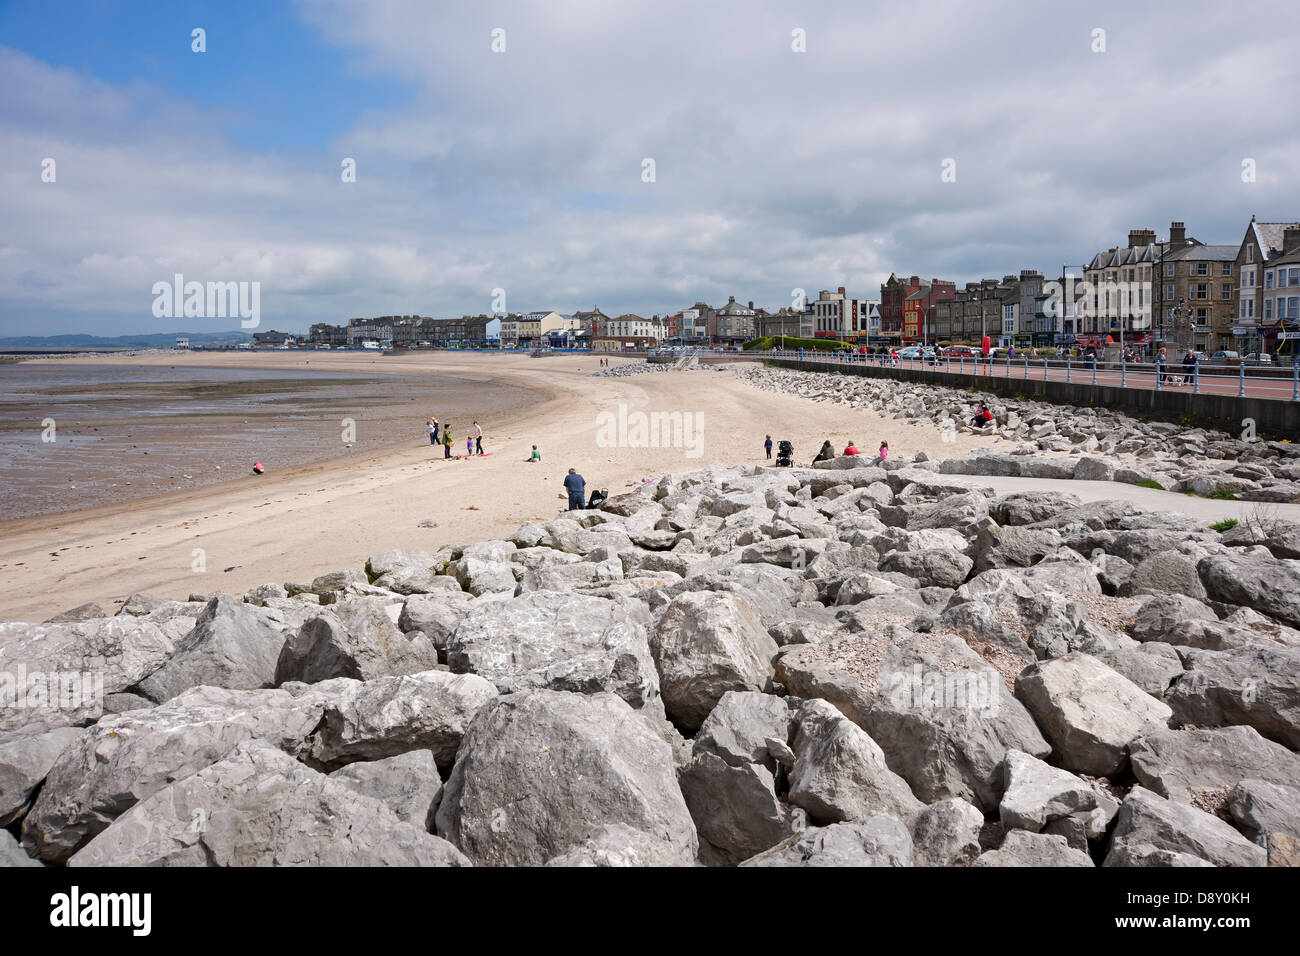 People tourists visitors on the beach sands sand at low tide seafront seaside resort Morecambe Bay Lancashire England UK United Kingdom Great Britain Stock Photo